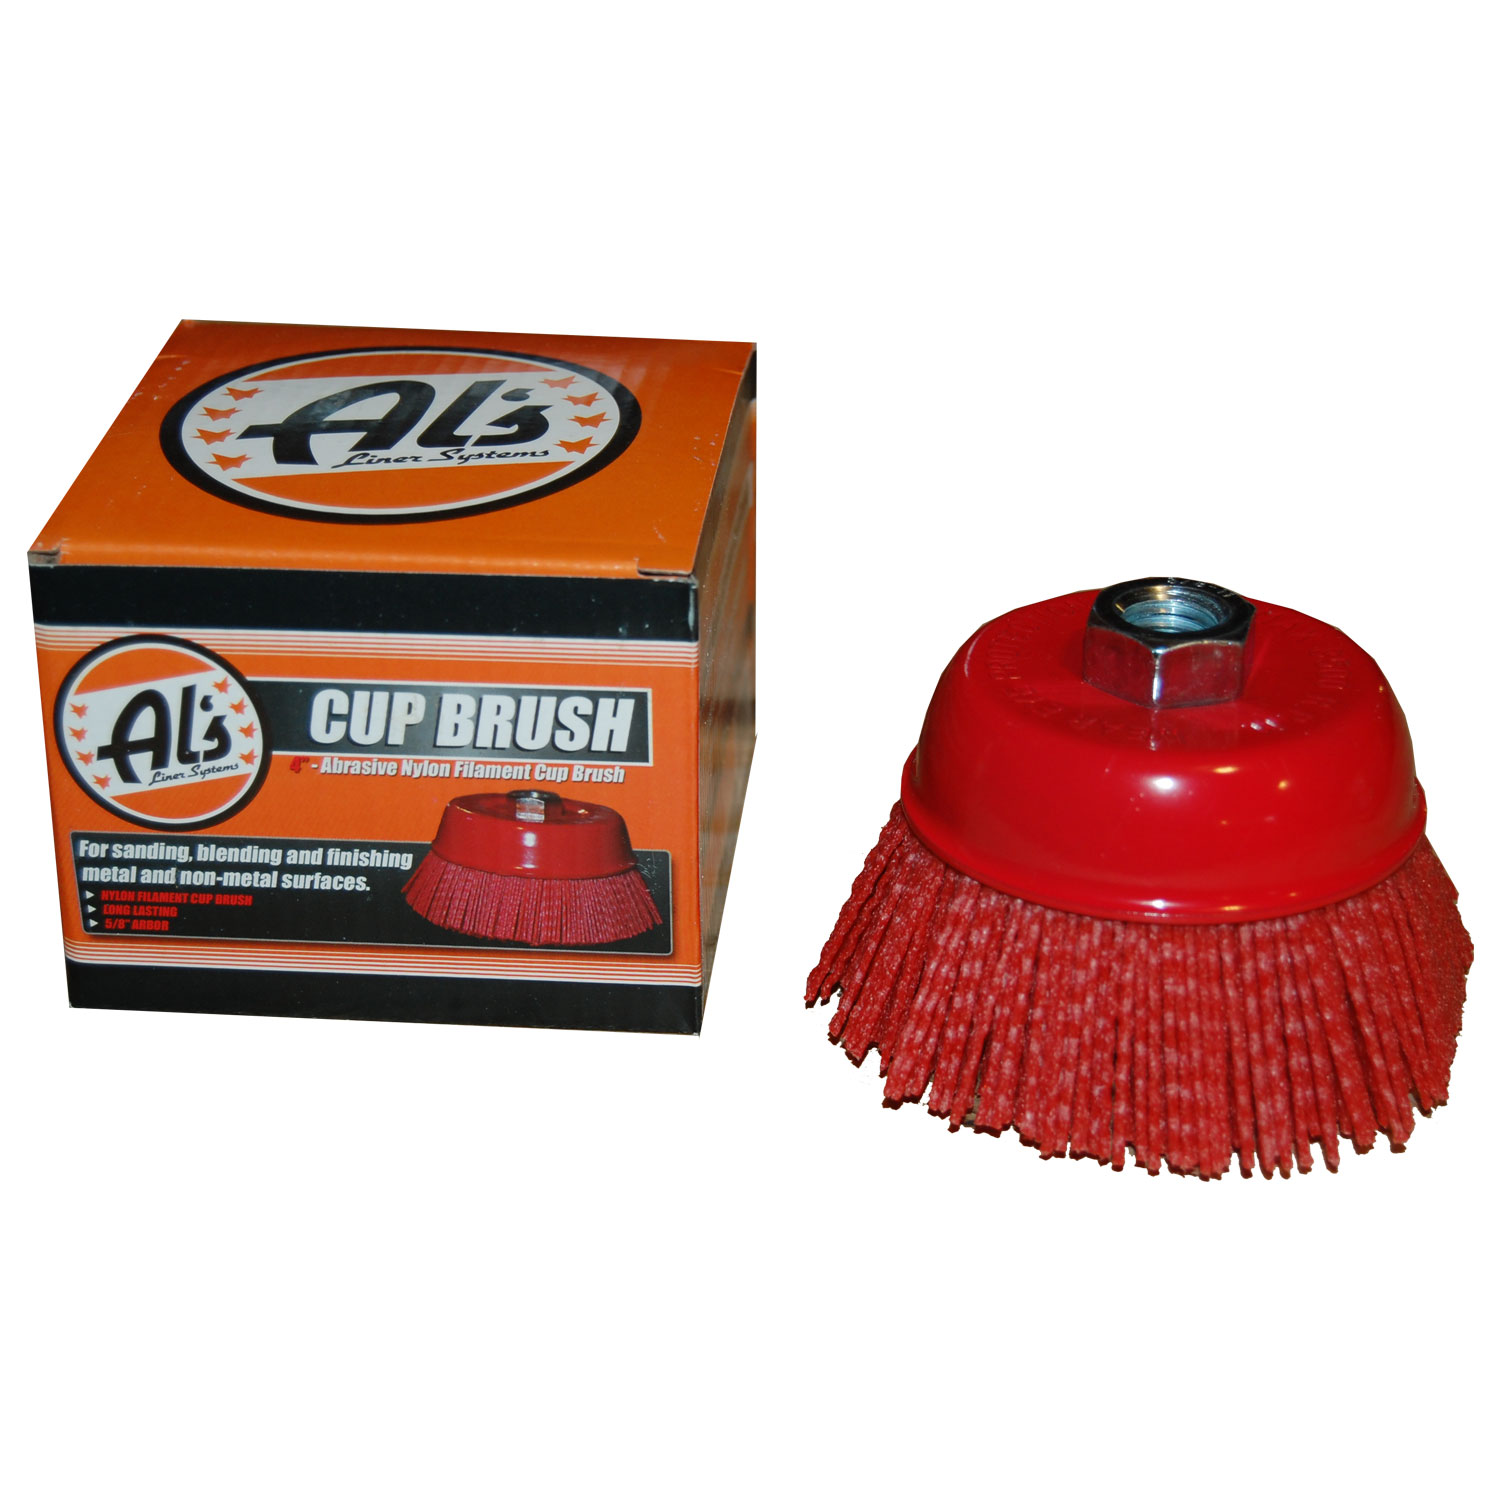 Paint Coarse Sanding Scuffing Brush 1/4 Drill Arbor 5/8 11 Thread Surface Prepping for Truck Bed Liner Coatings Remove Rust Dura-Gold 4 Abrasive Filament Nylon Bristle Cup Brush Corrosion 